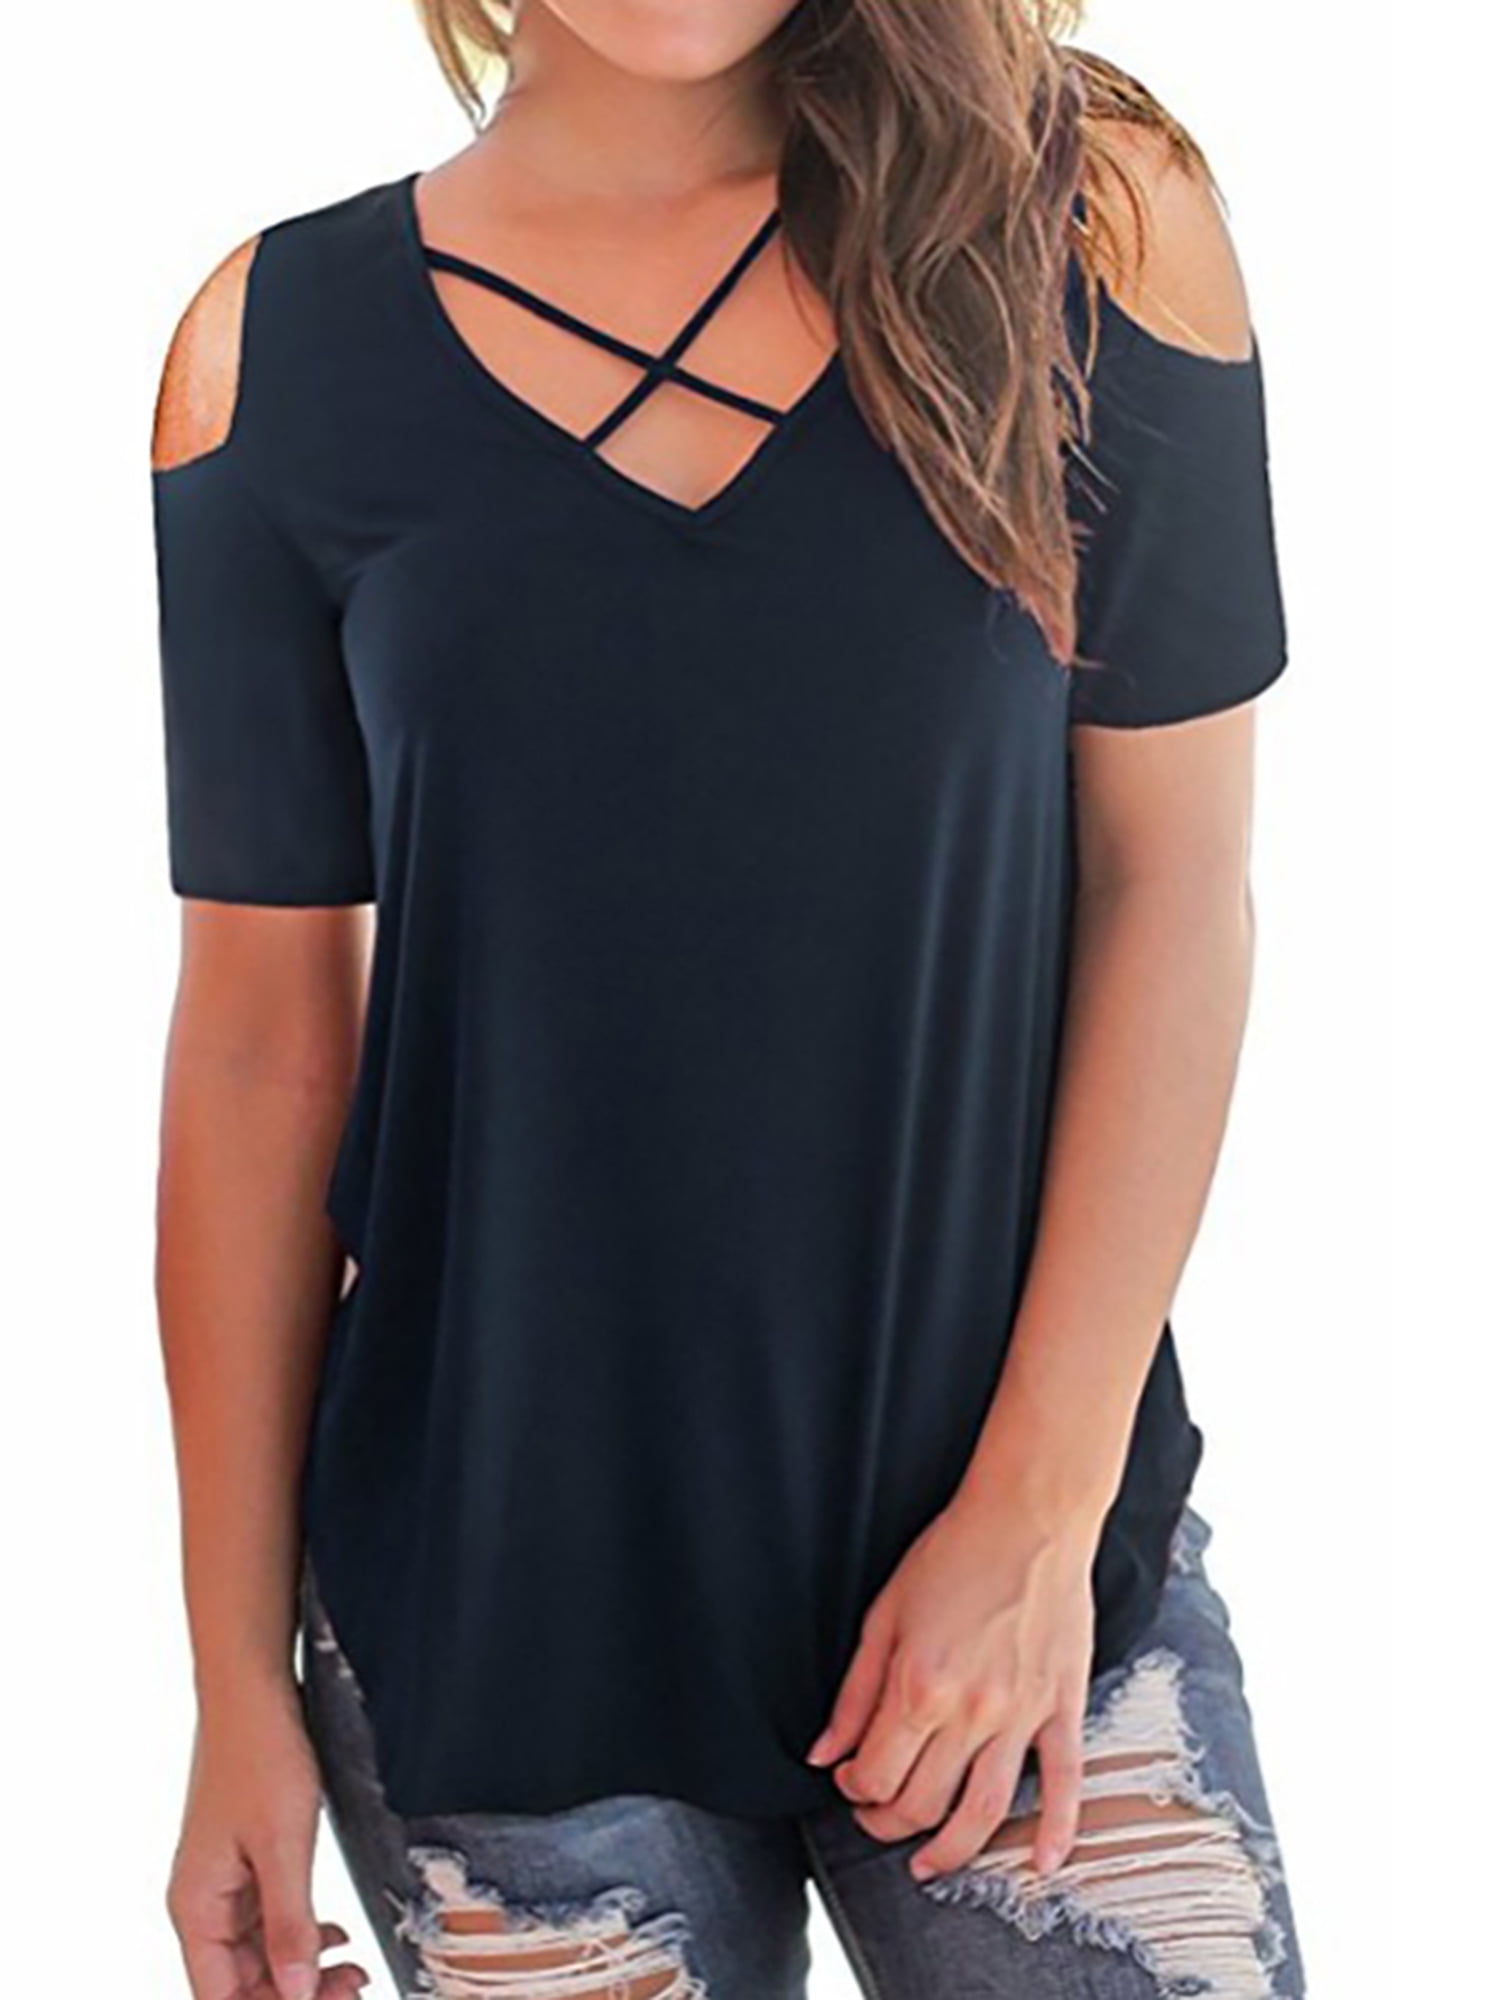 VLDO Blouse for Women Ladies Off Shoulder T-Shirt Sleeveless Round Neck Casual Tops Tee